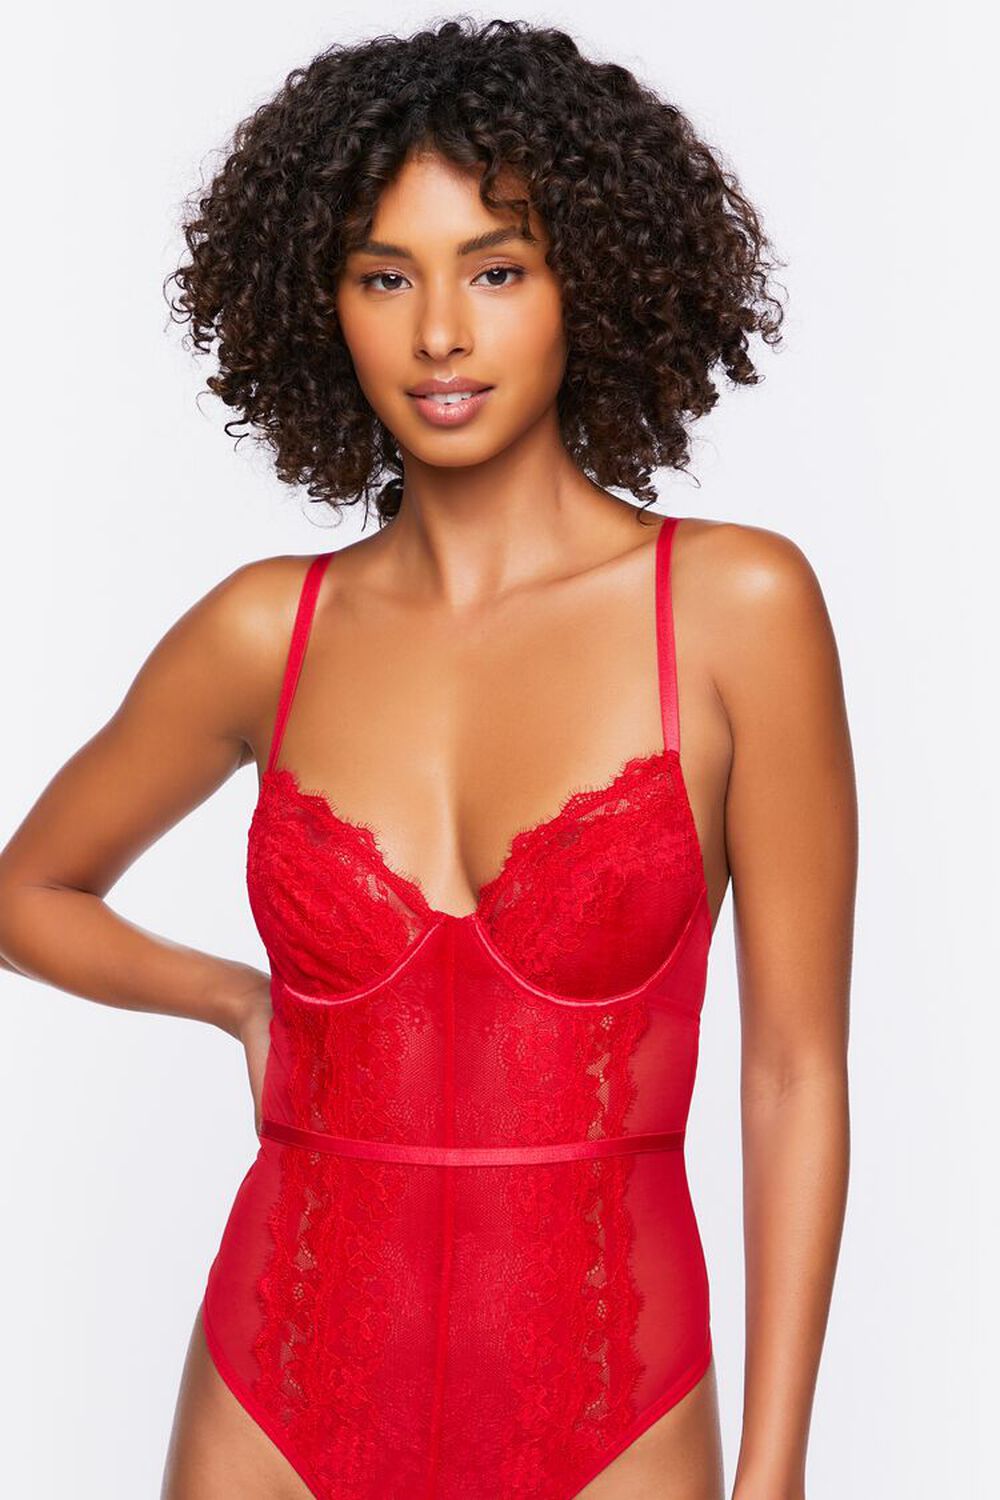 TOMATO Sheer Lace-Trim Teddy, image 1